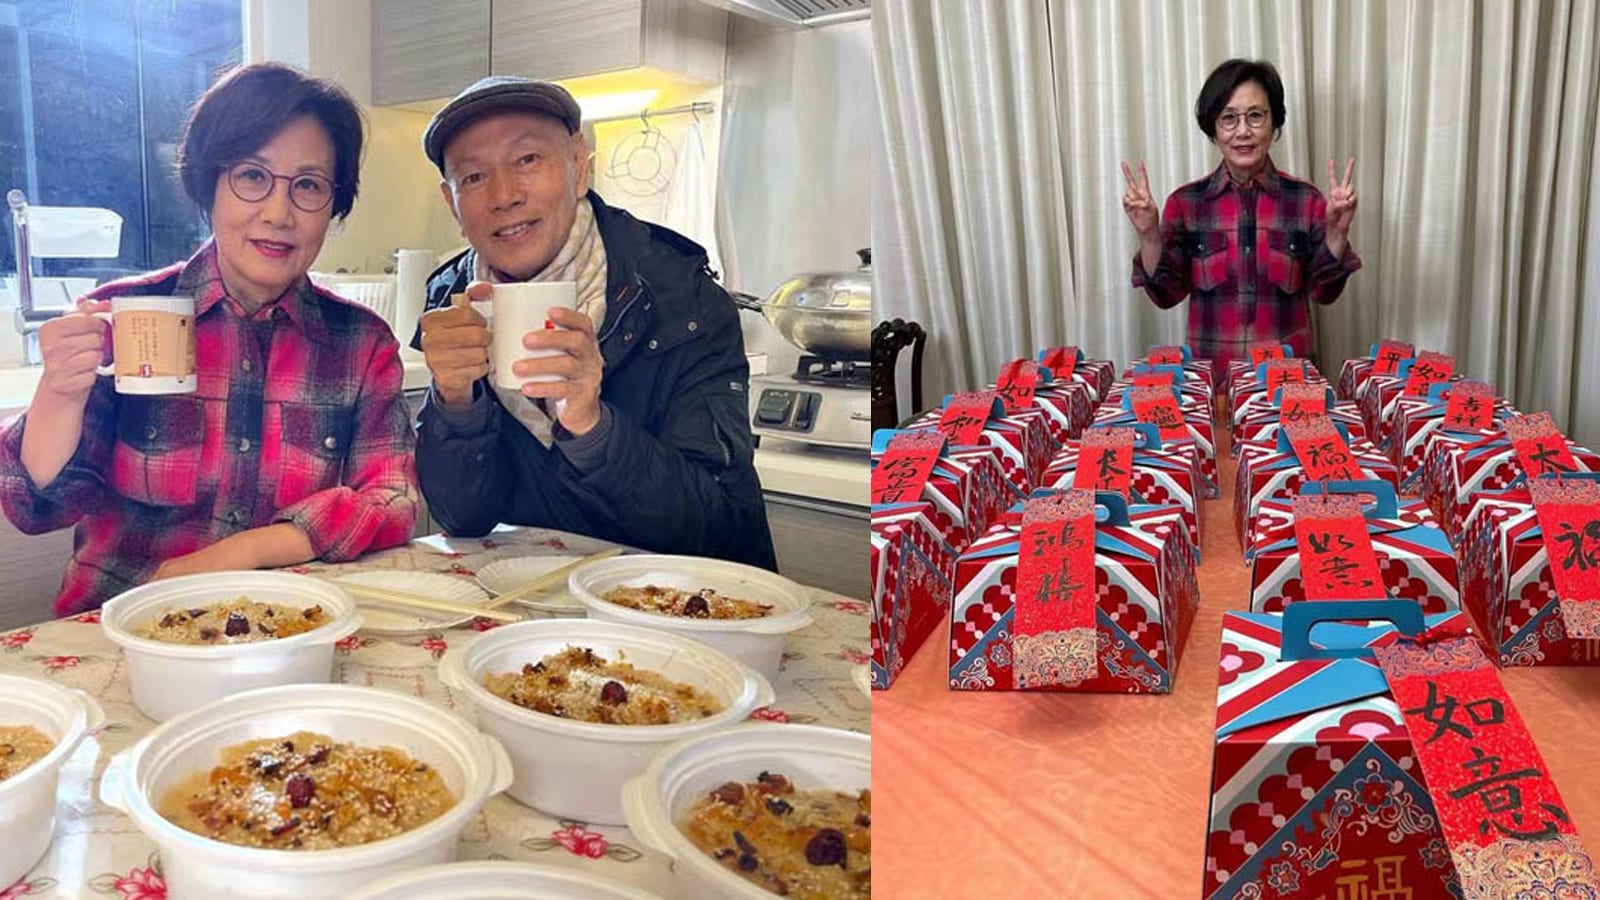 Liza Wang Made 50 CNY Radish Cakes To Give To Her Family & Friends